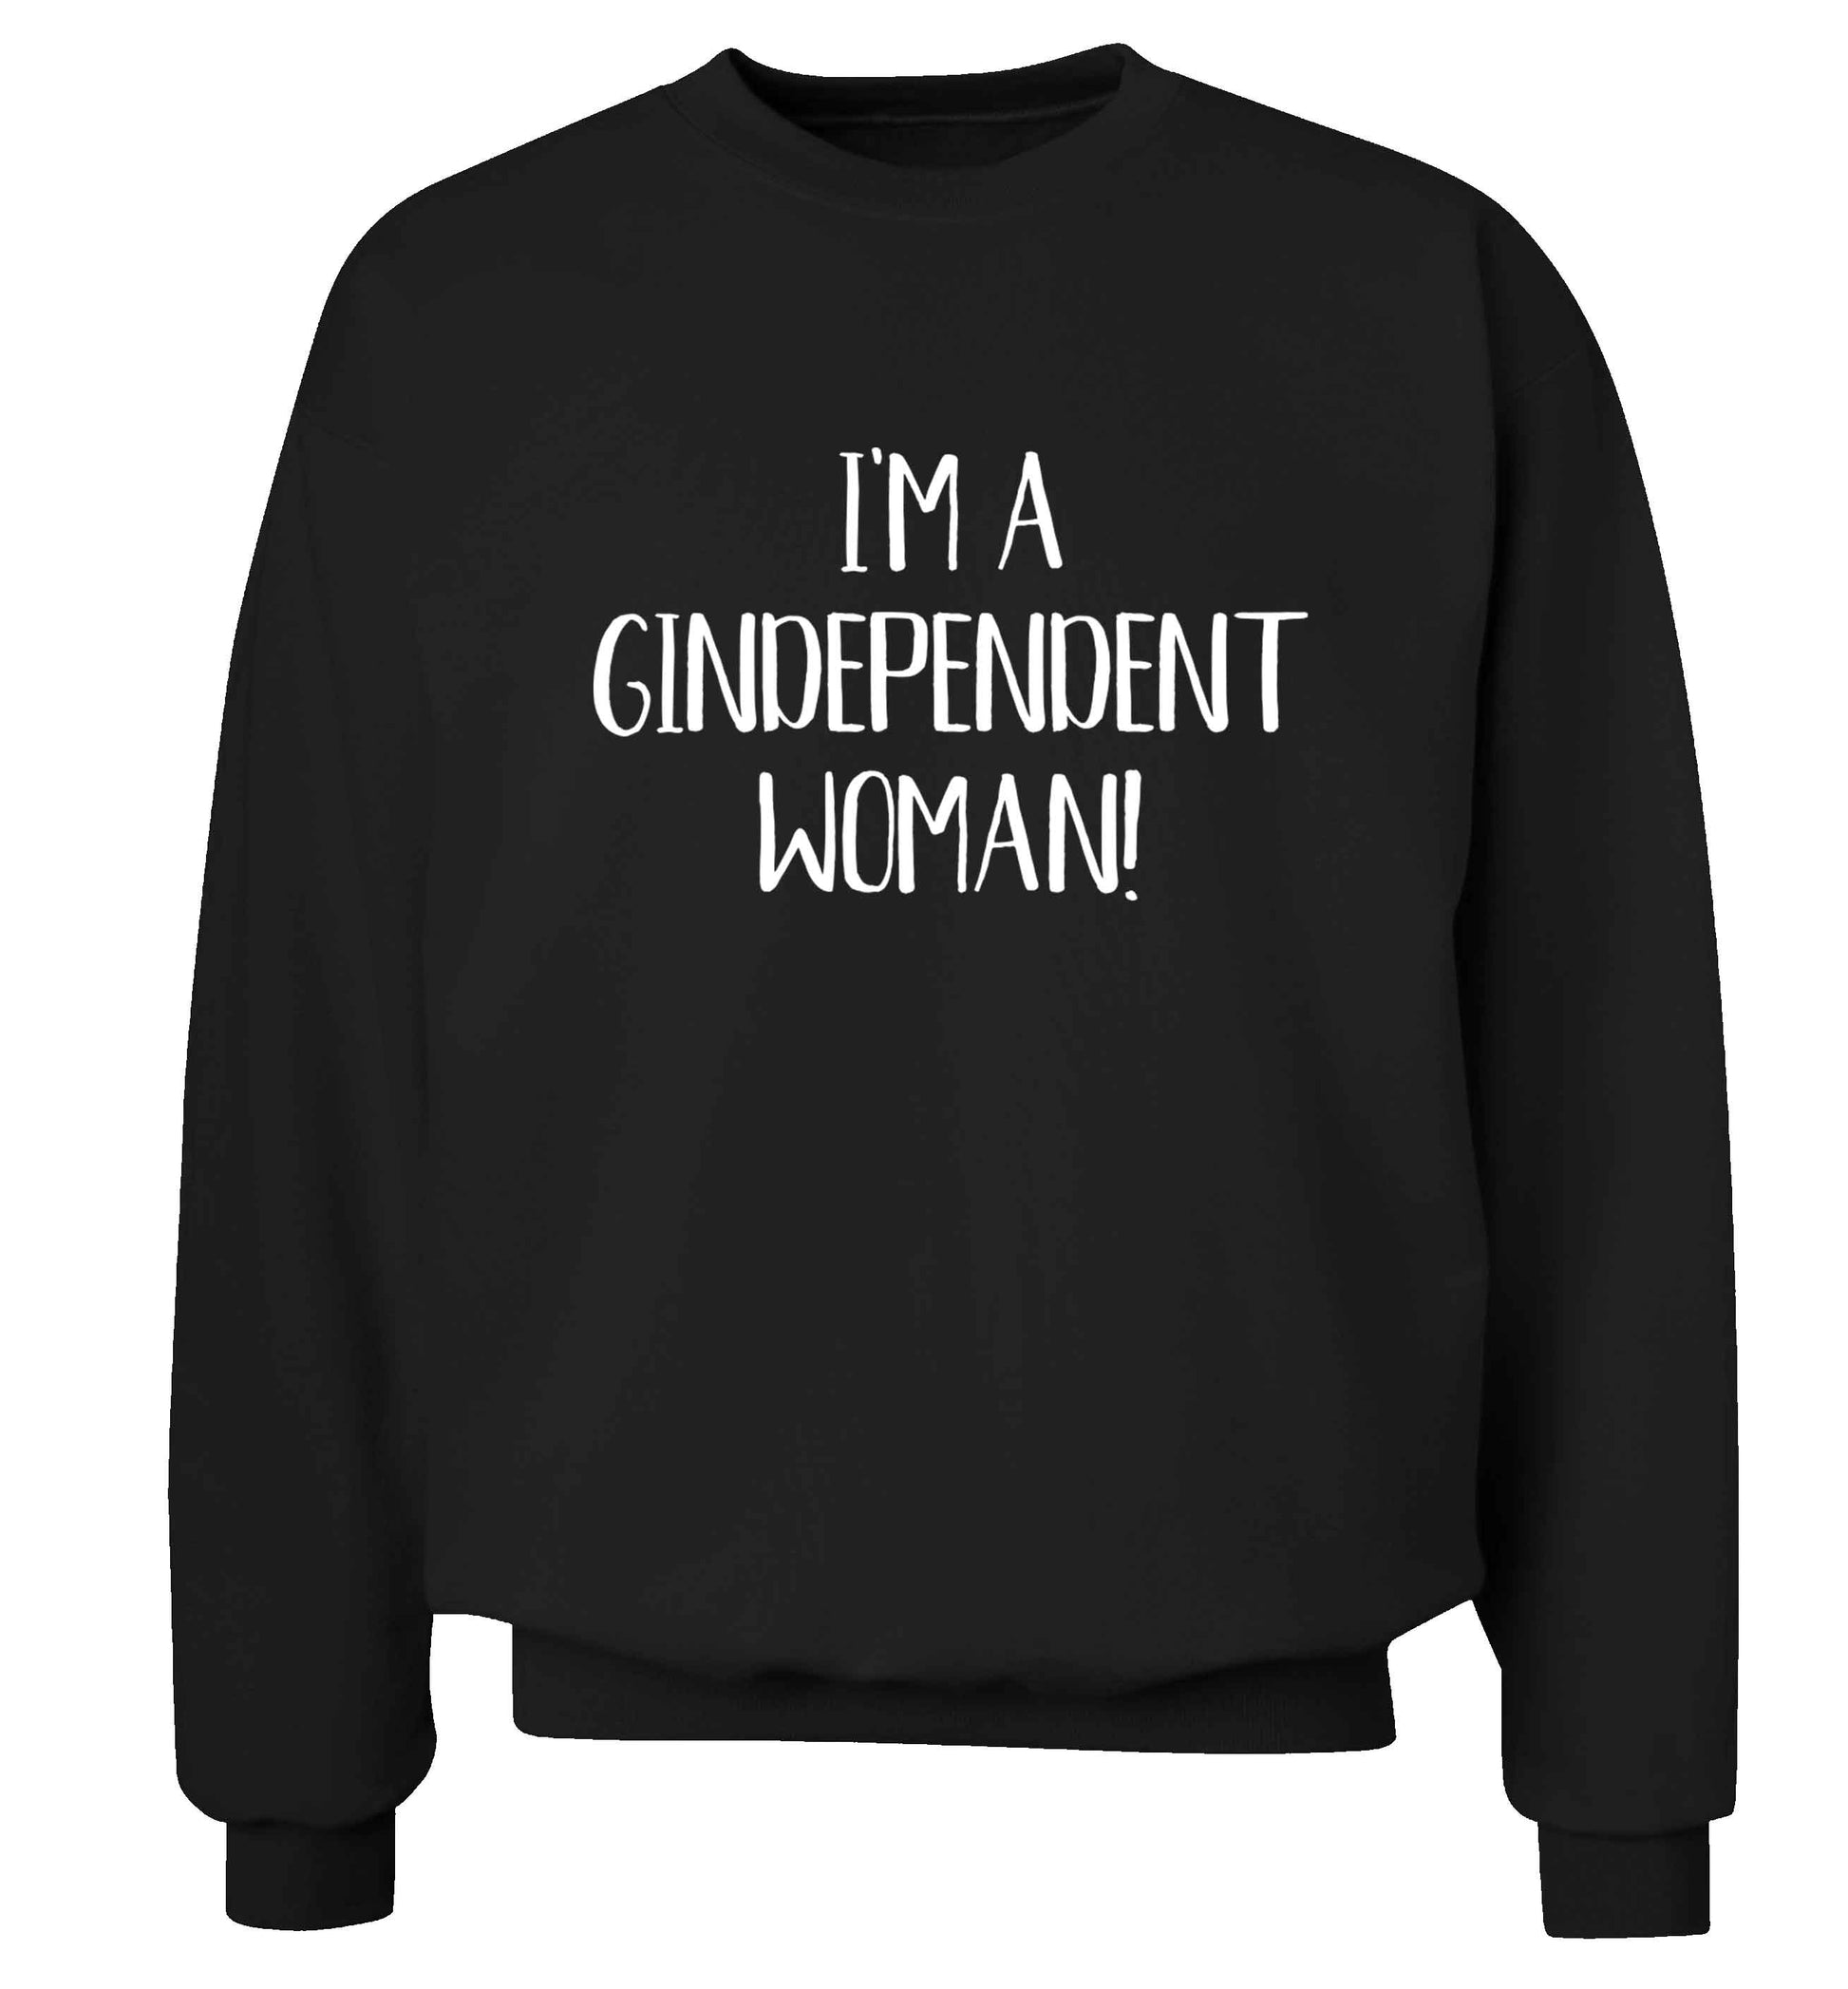 I'm a gindependent woman Adult's unisex black Sweater 2XL